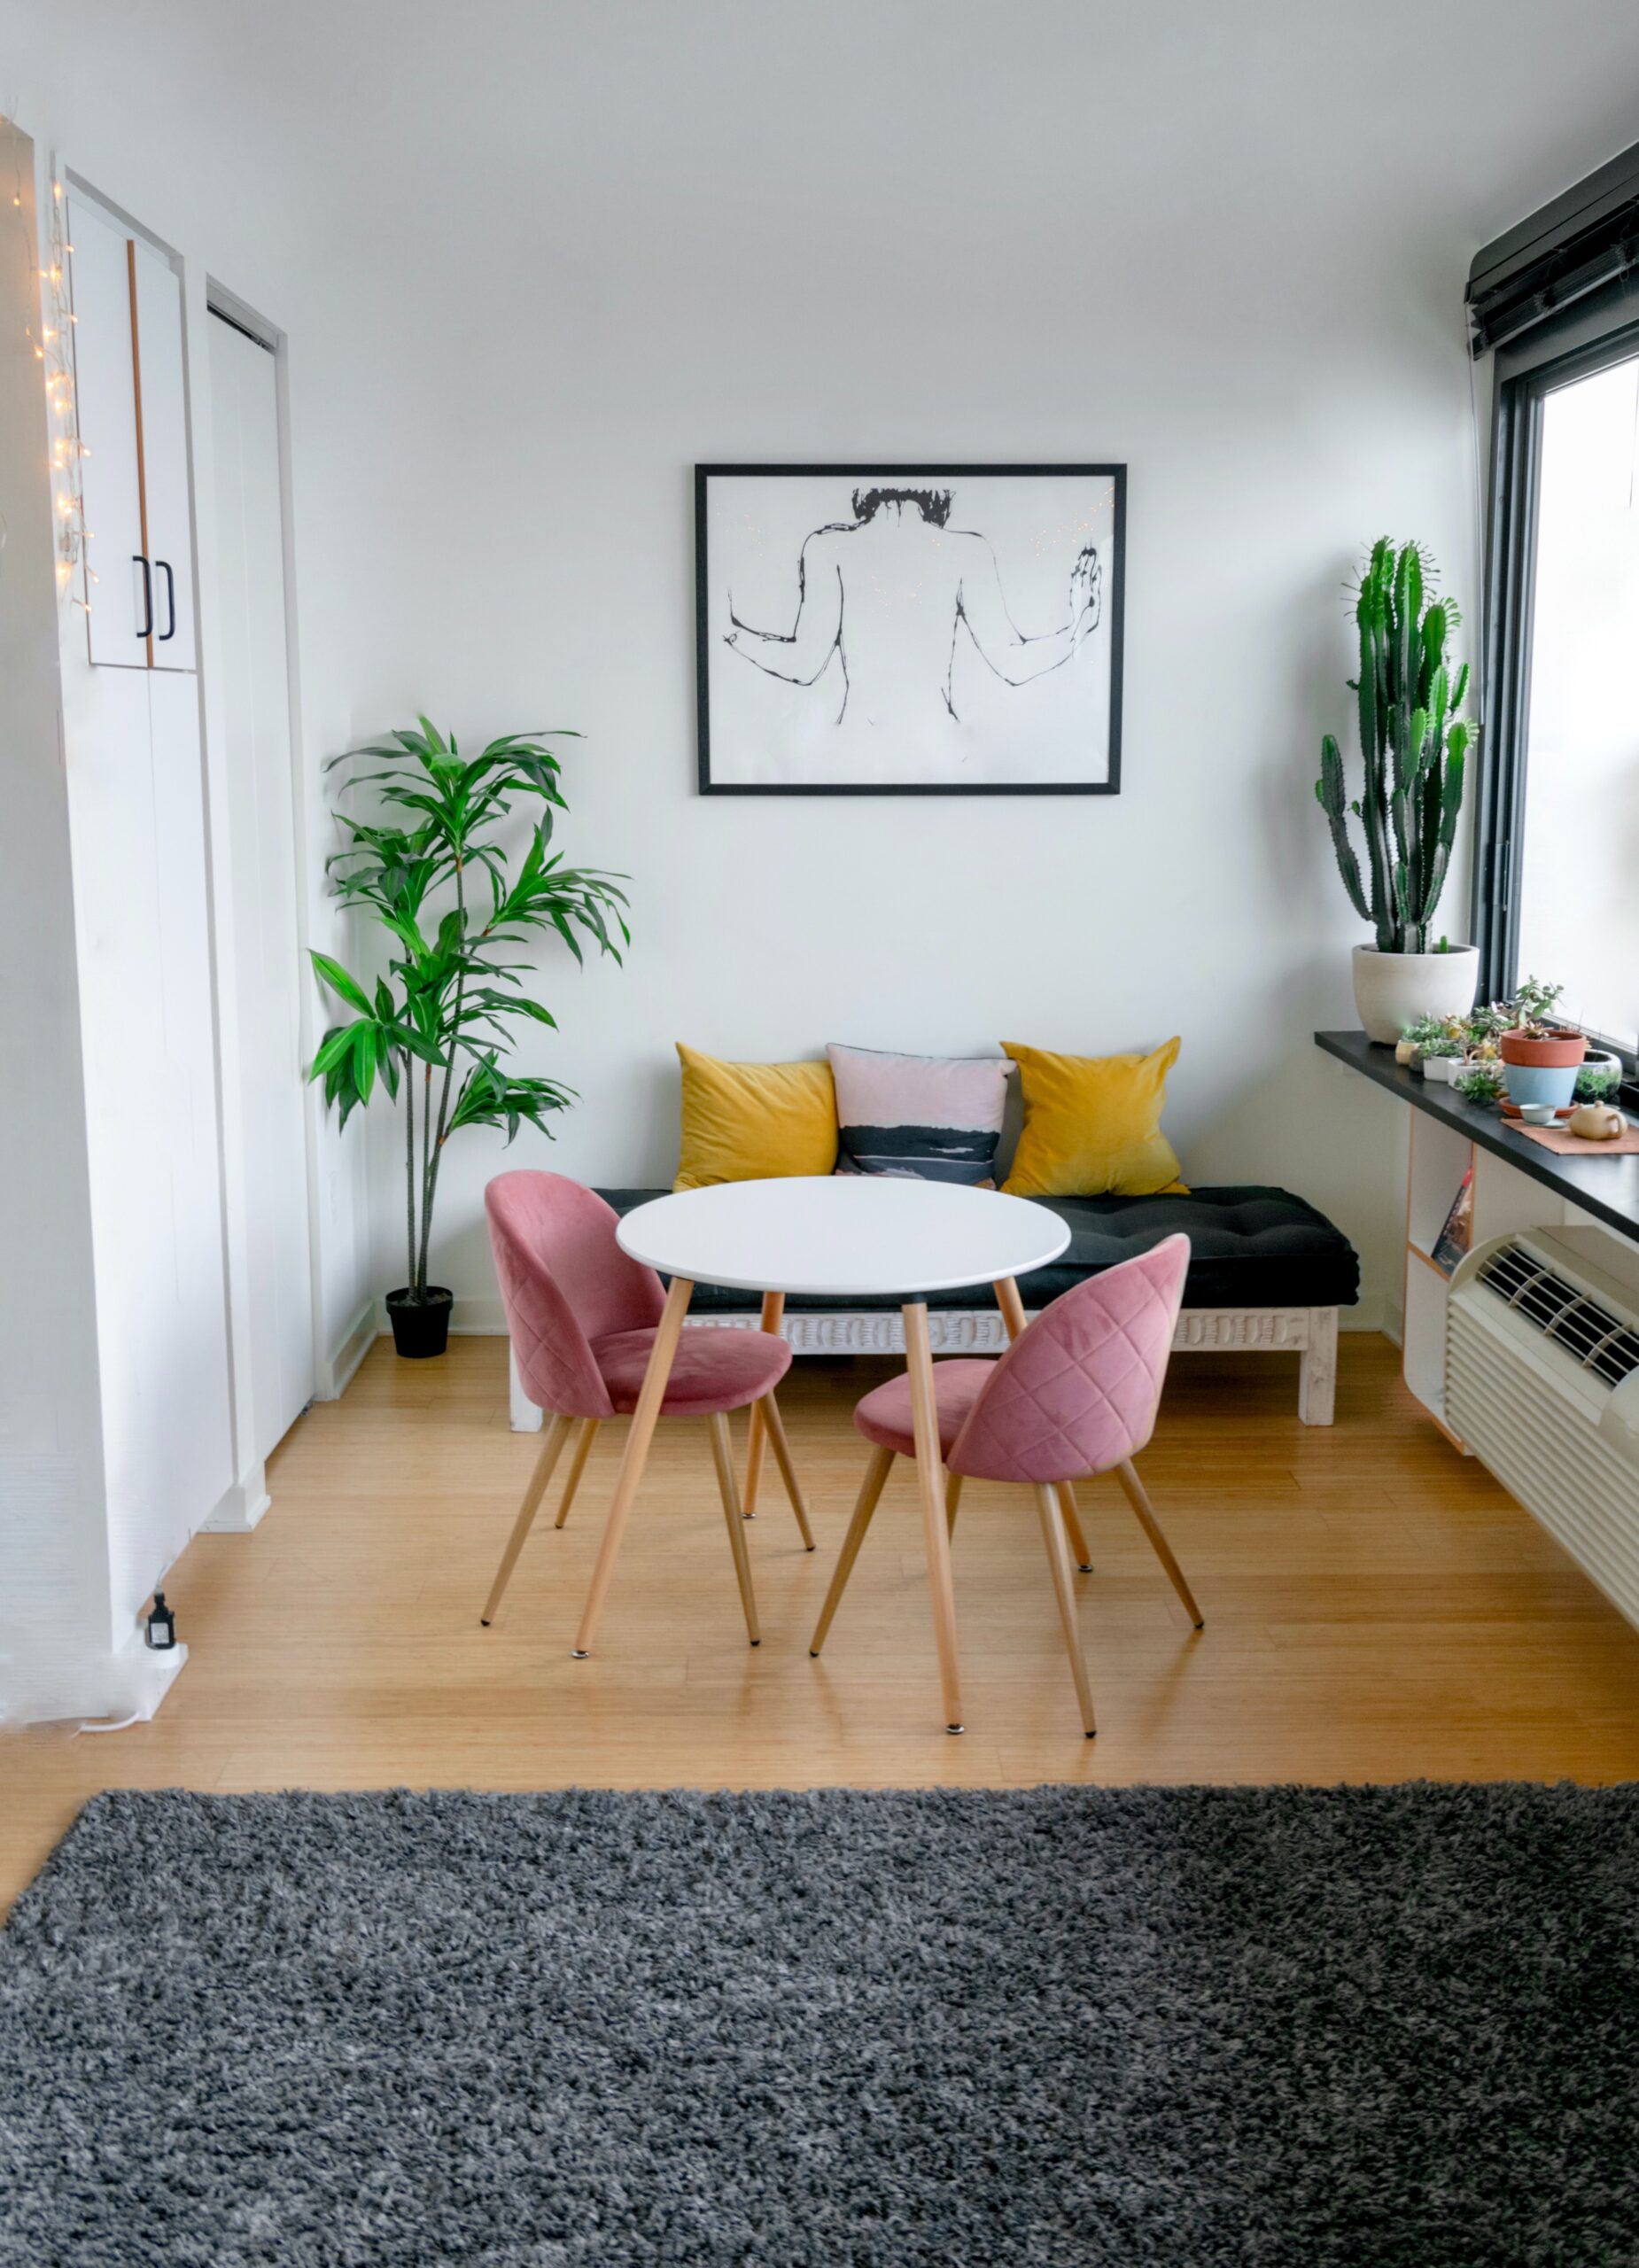 How to Make a Small Space Seem Larger